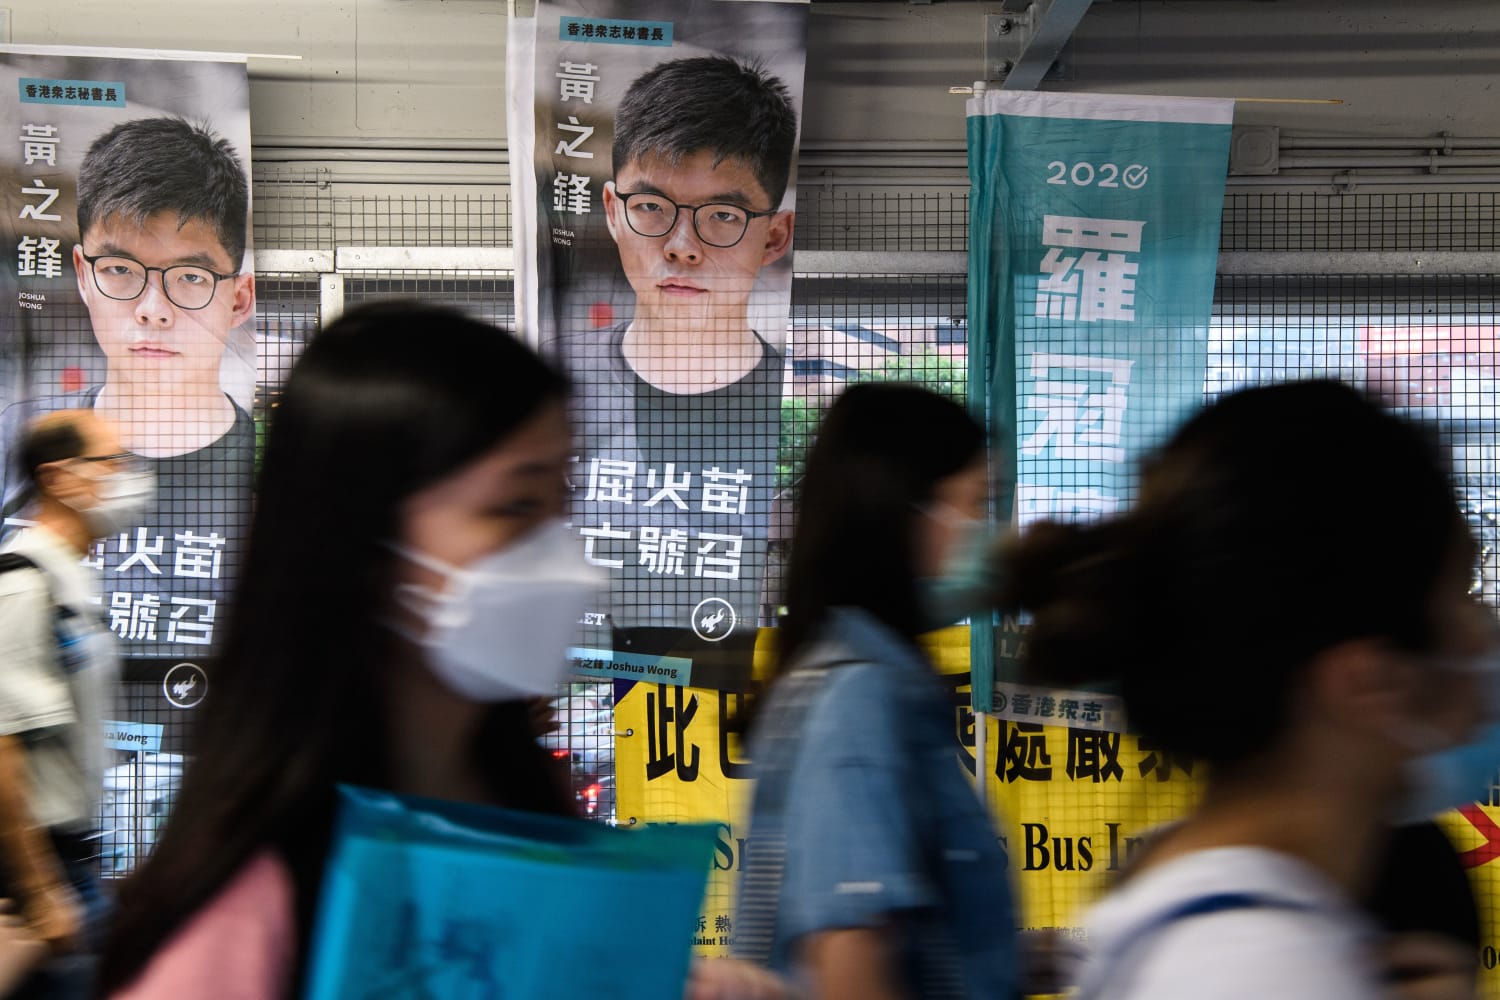 Hong Kong activist Joshua Wong says Beijing's bill is about boosting Communist regime, not national security